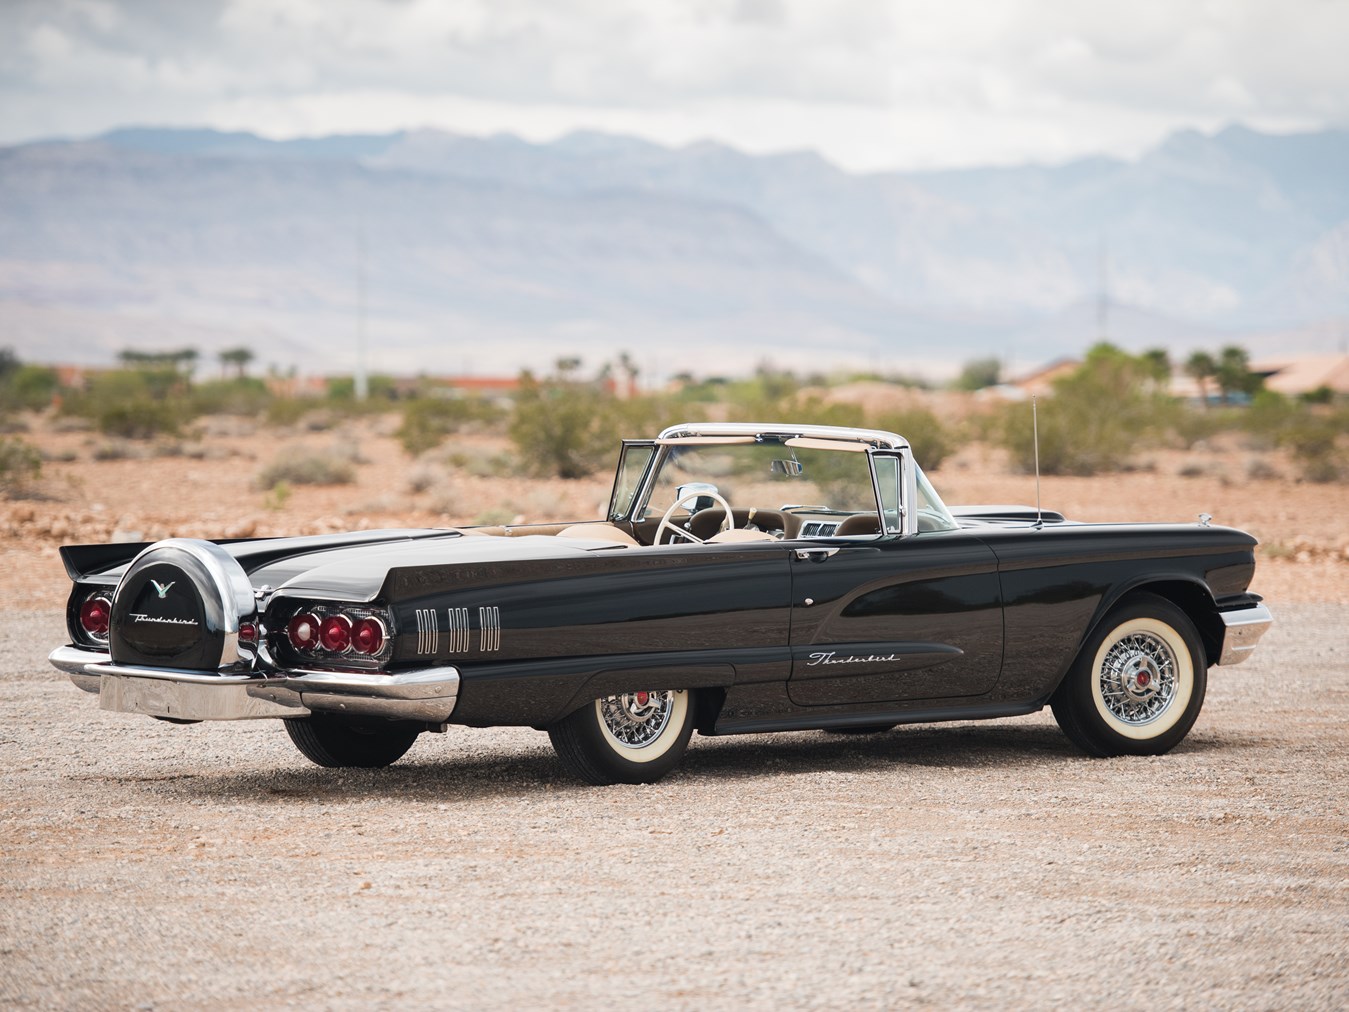 Viewed from any angle the second generation Ford Thunderbird simply looks stylish and dignified.